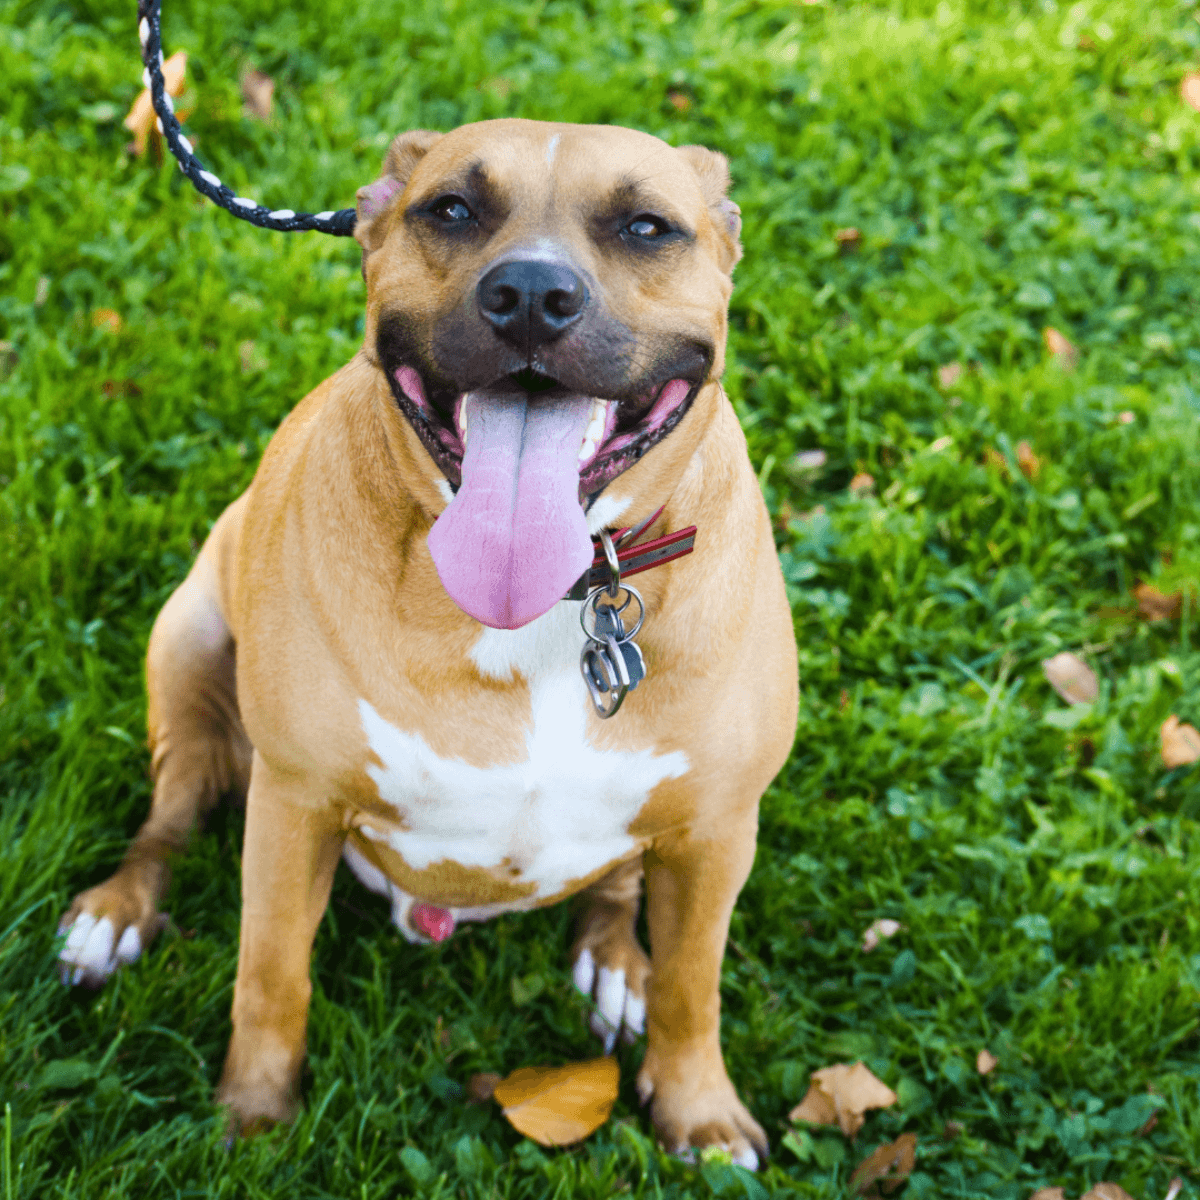 Dog smiling while on a leash